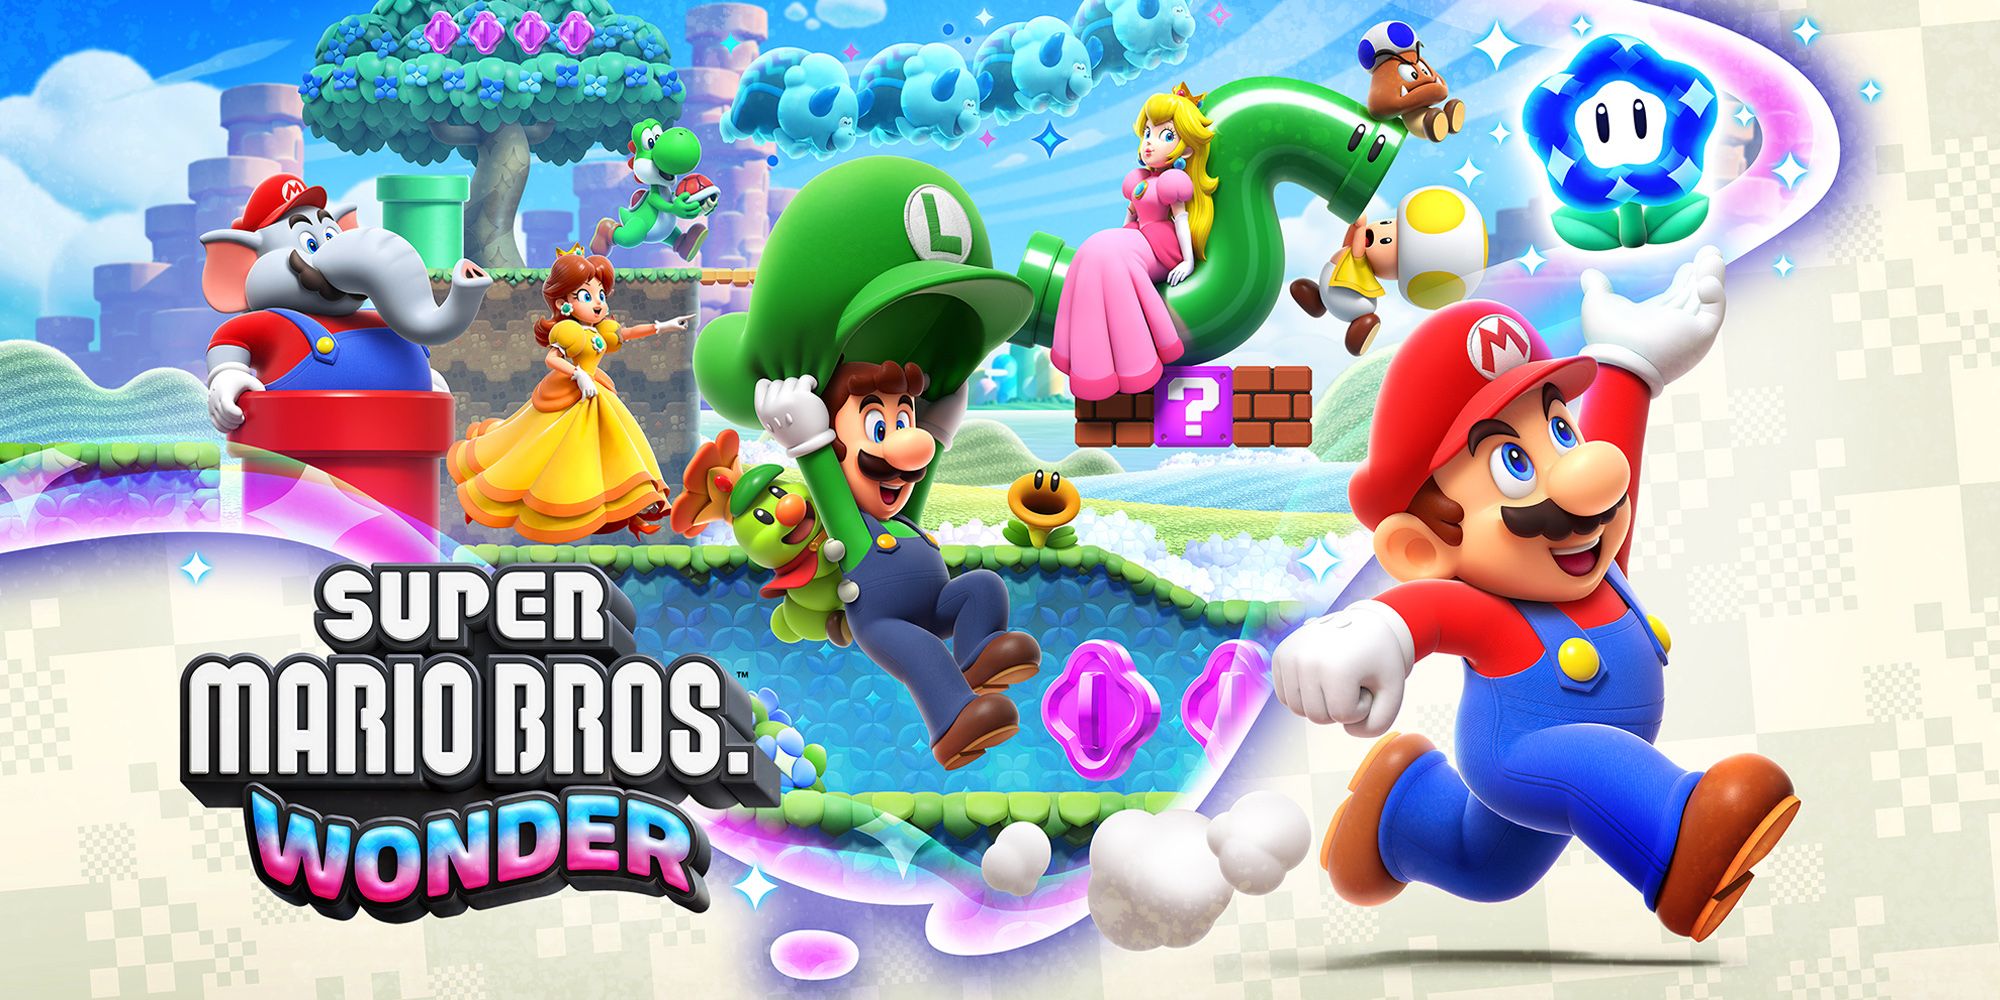 Every Super Mario Bros. Wonder Playable Character, Ranked Worst To